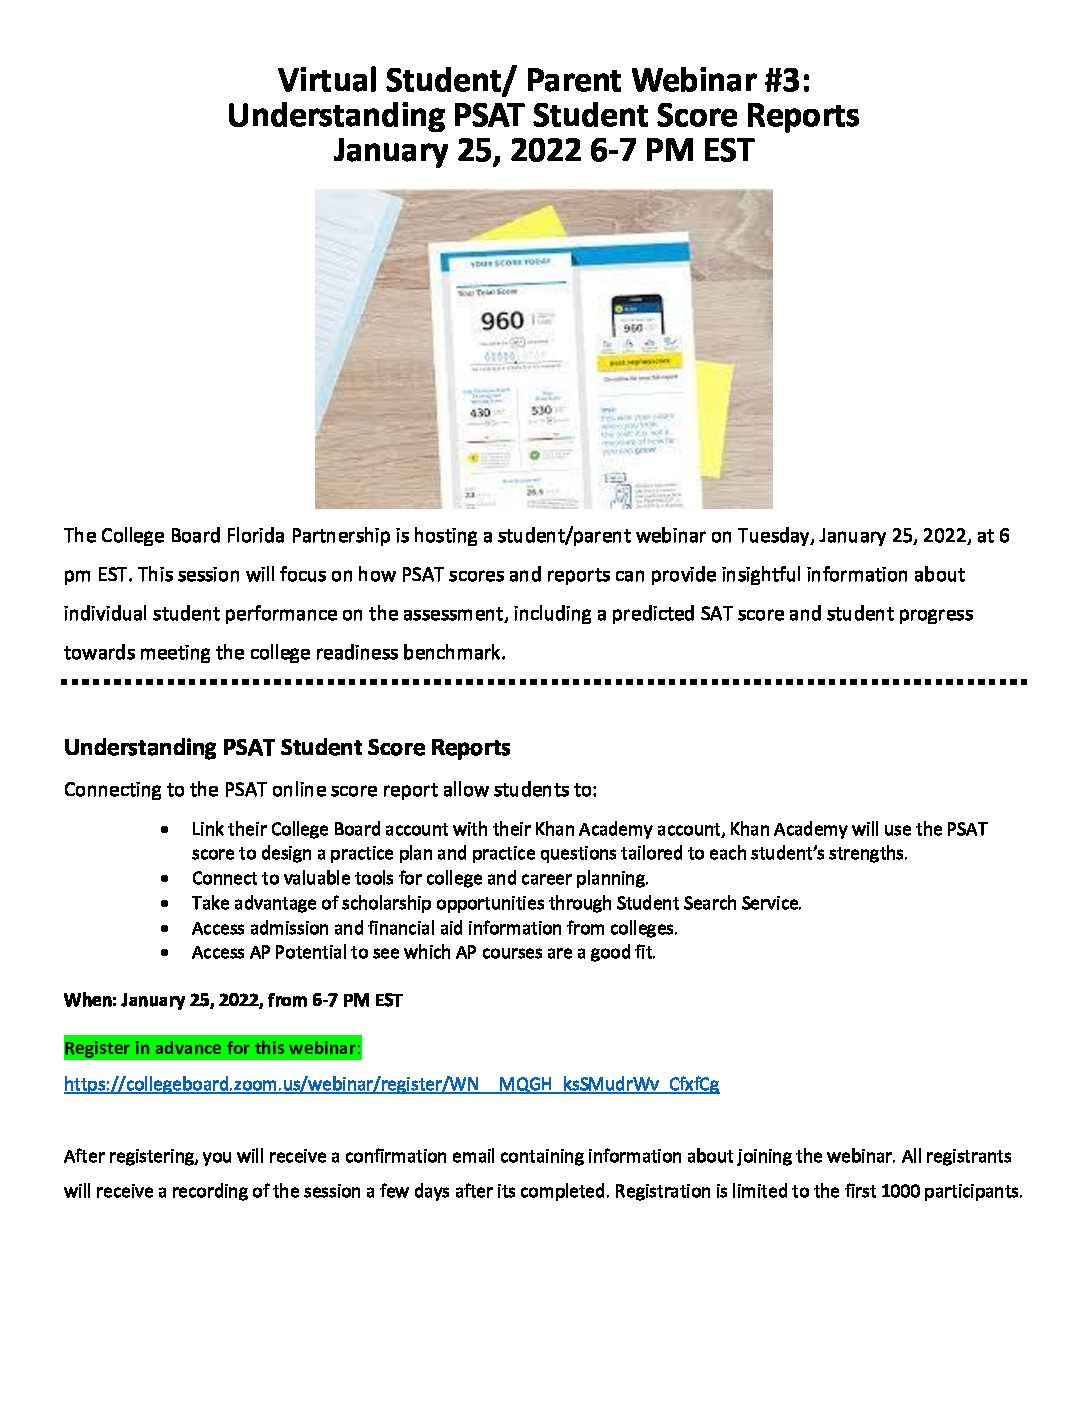 Sign Up! Flyer regarding web seminar for students and parents to understand PSAT scores.